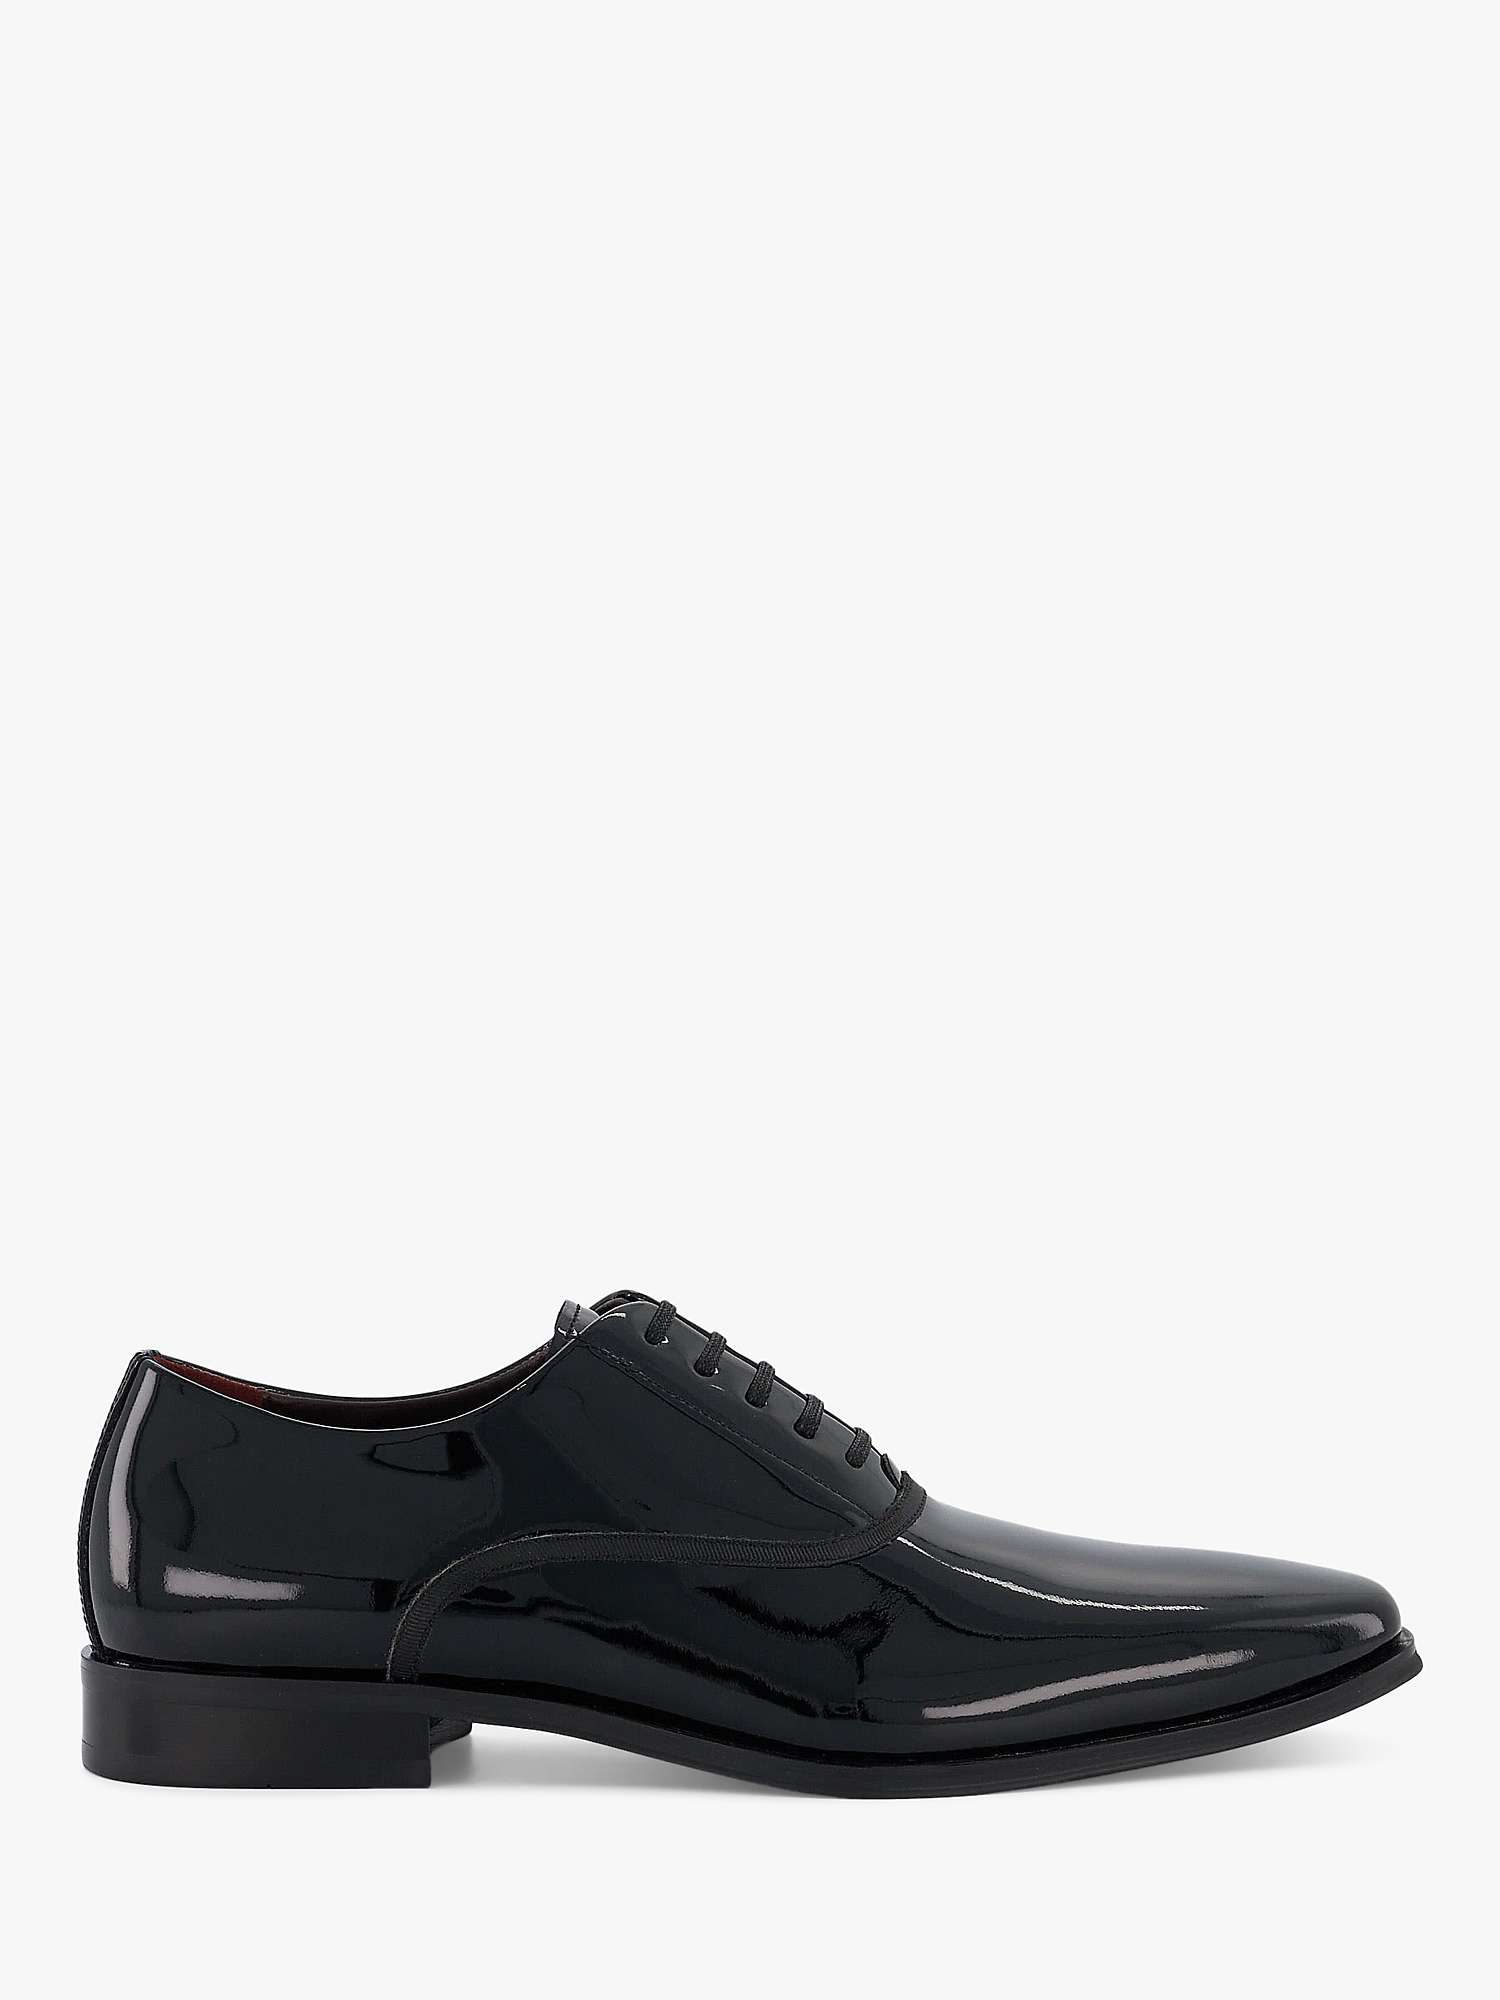 Buy Dune Swallow Patent Leather Oxford Shoes, Black Online at johnlewis.com